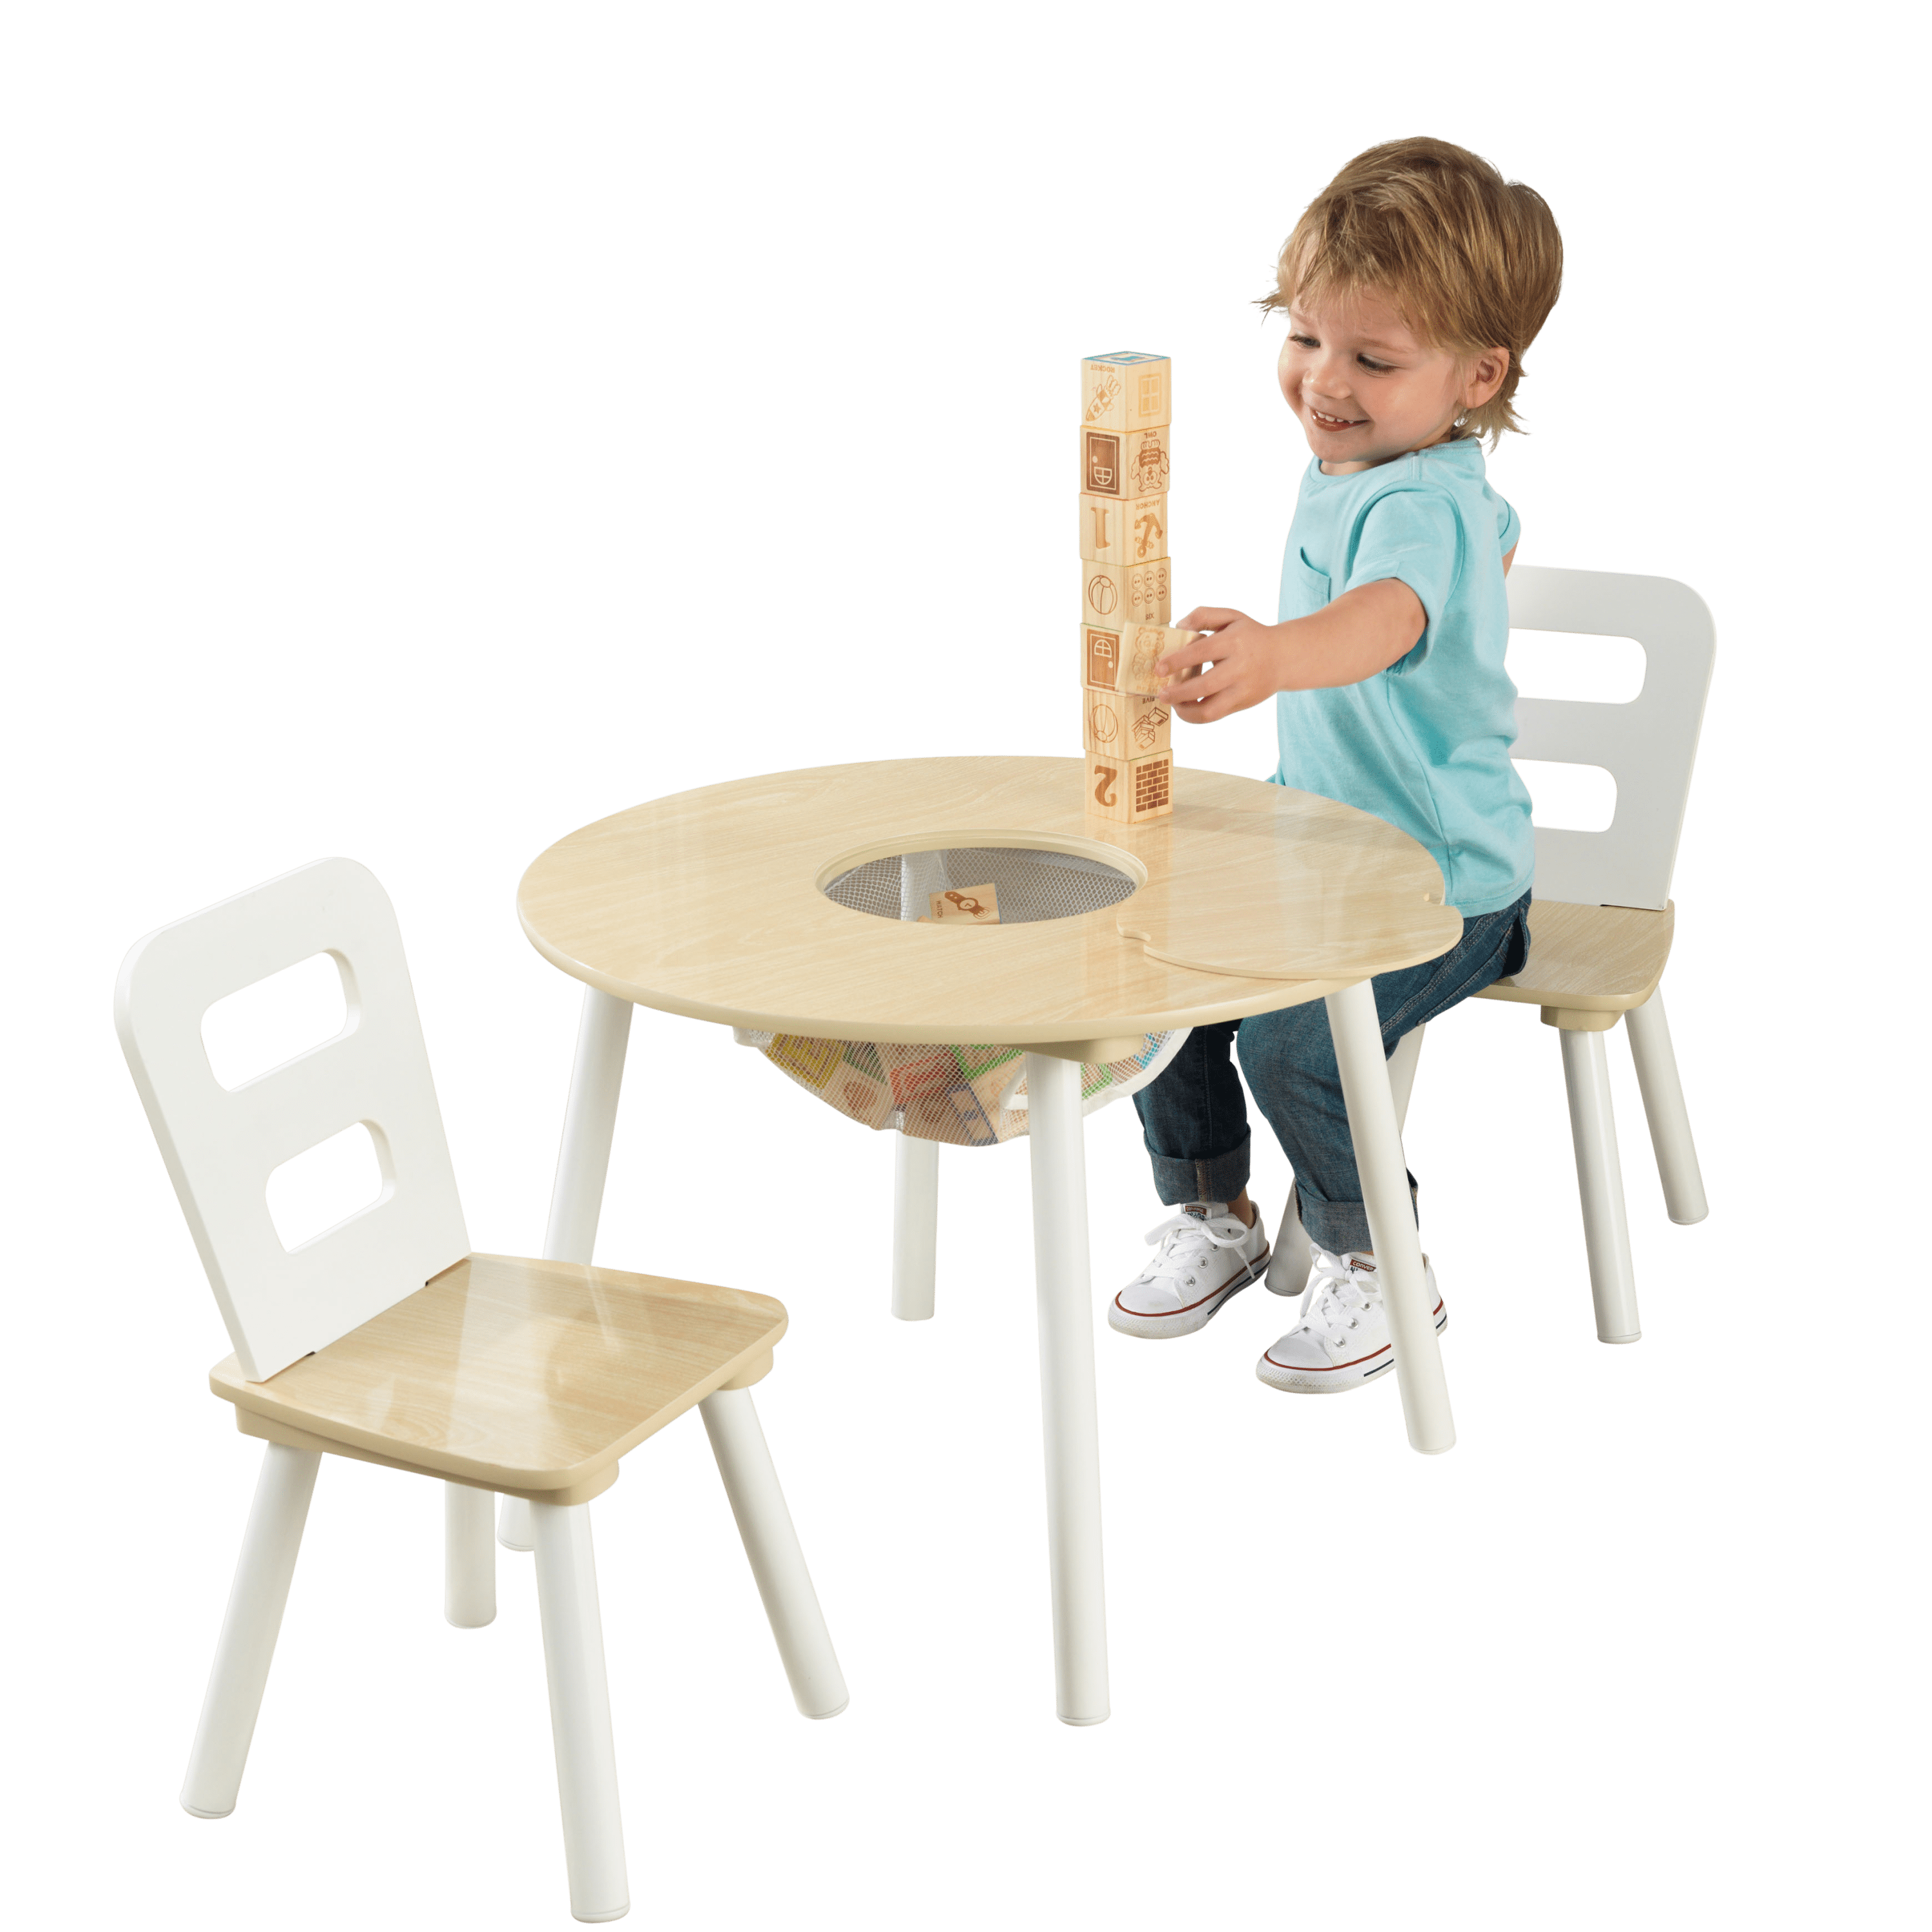 Details about   KIDKRAFT 3 PIECE ROUND TABLE AND 2 CHAIR SET CENTER MESH STORAGE MINT & WHITE 